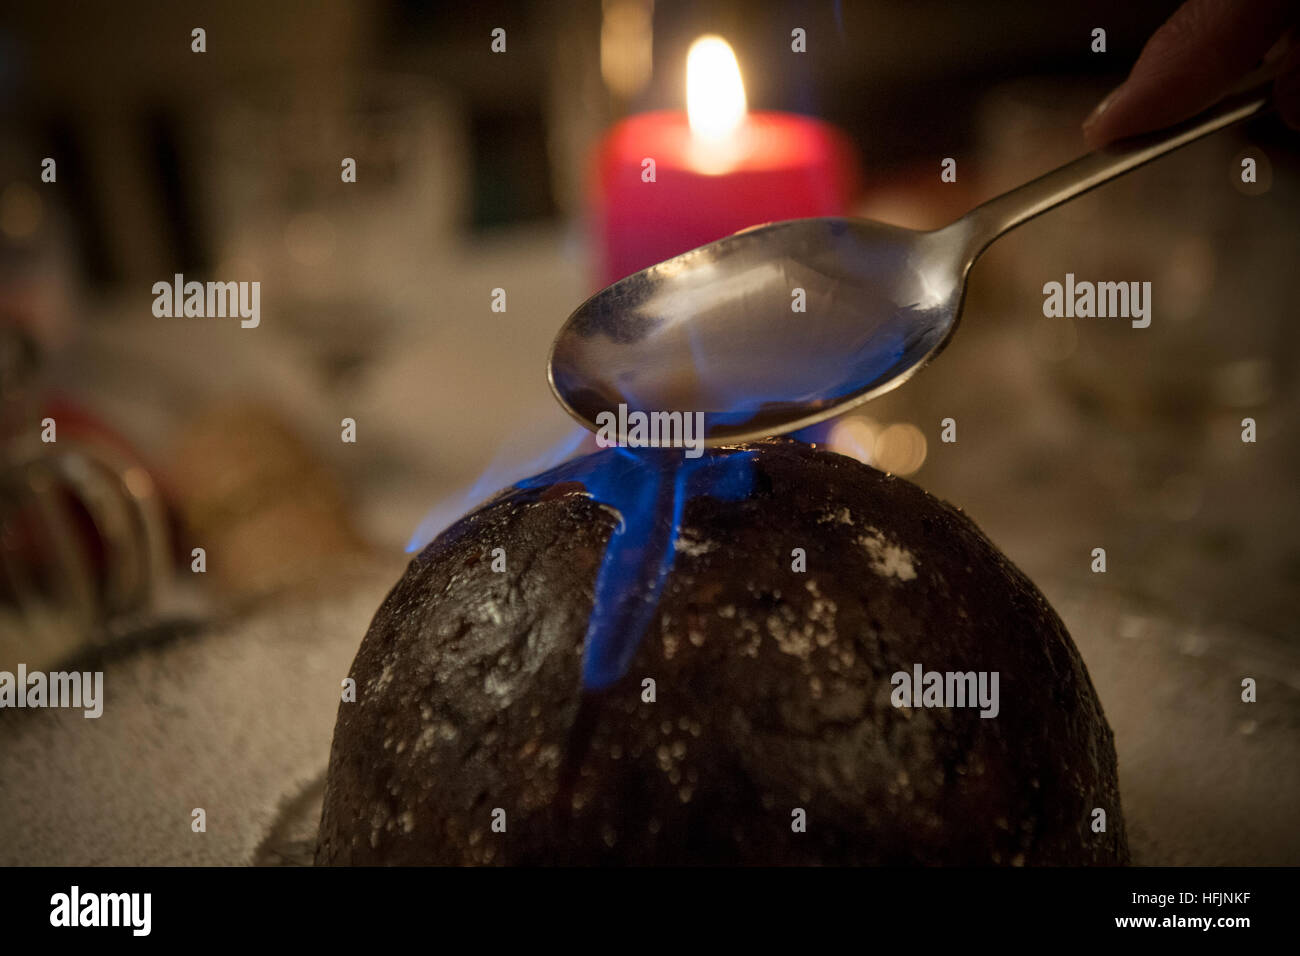 Christmas pudding with brandy alight on it Stock Photo